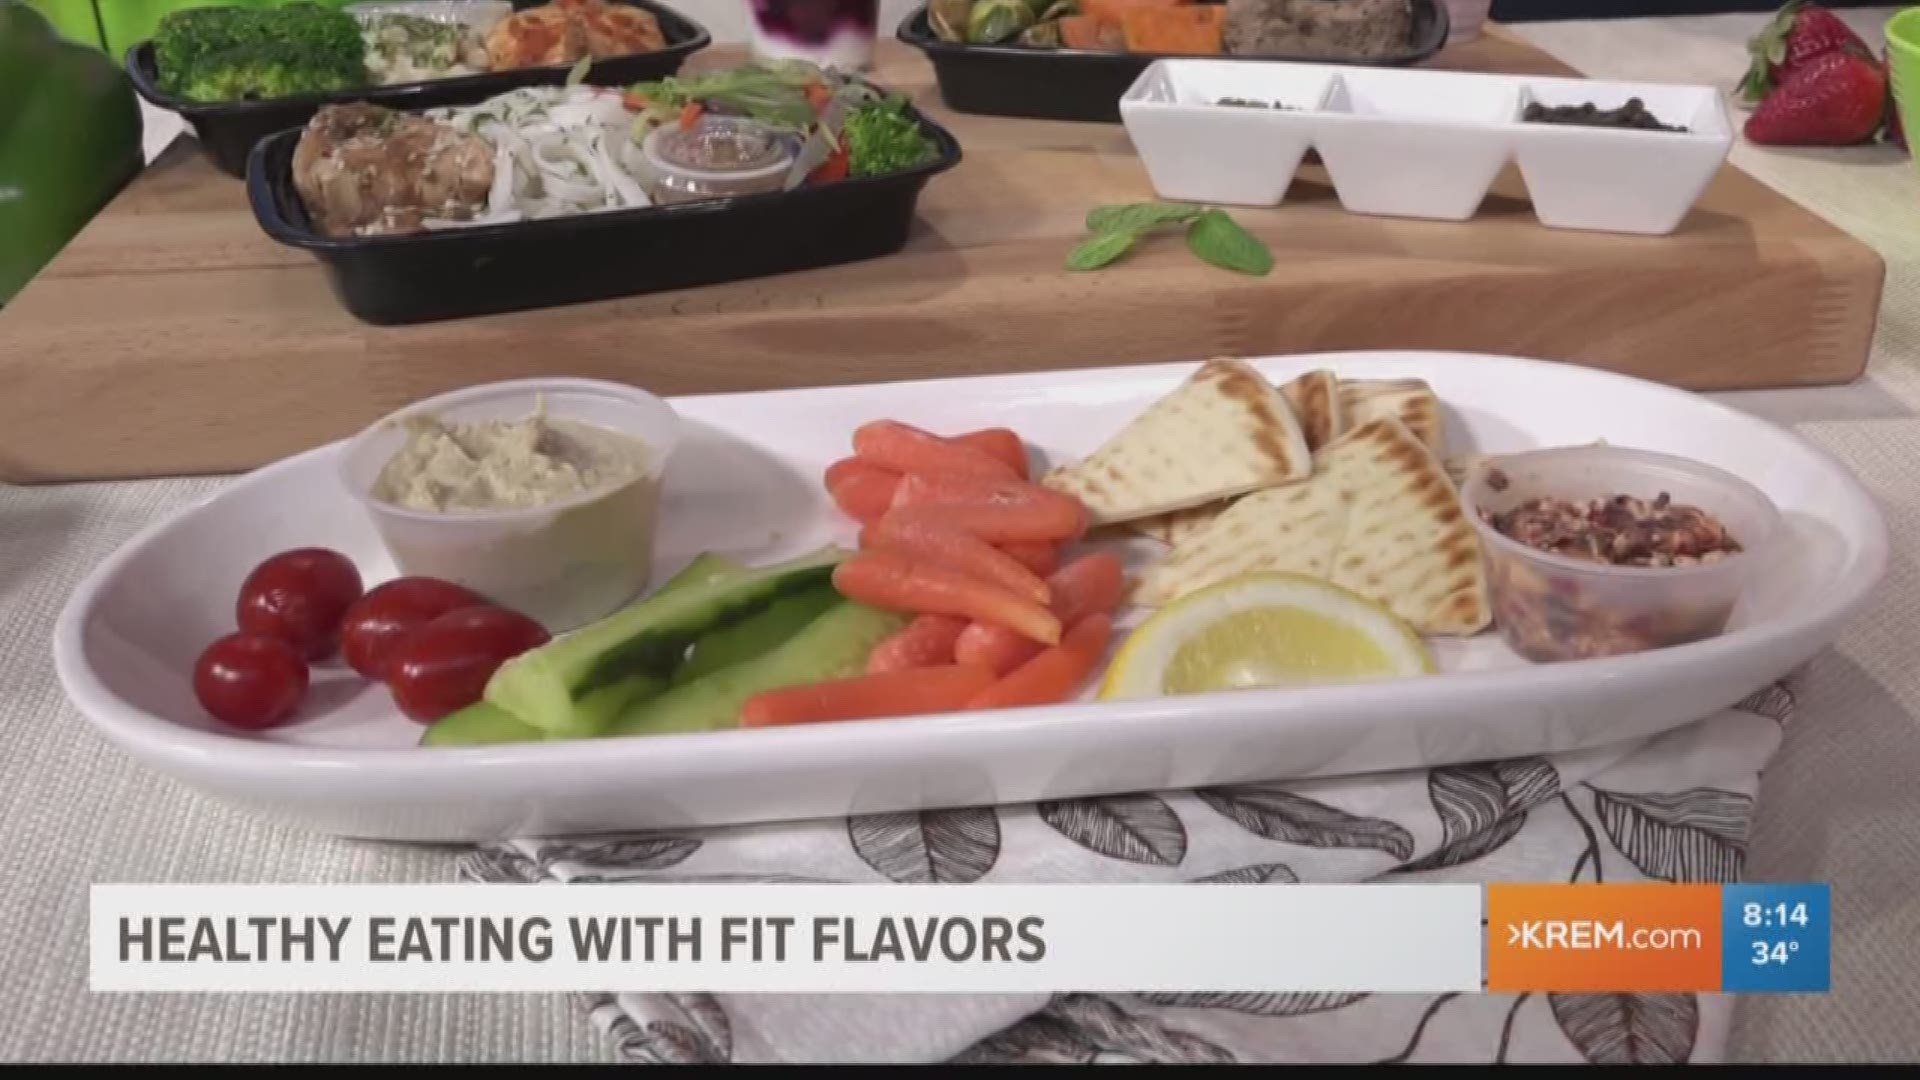 If you are looking to eat healthy but are not sure where to start, Fit Flavors can help. The Spokane business offers pre-made meals that help you reach your fitness goals.